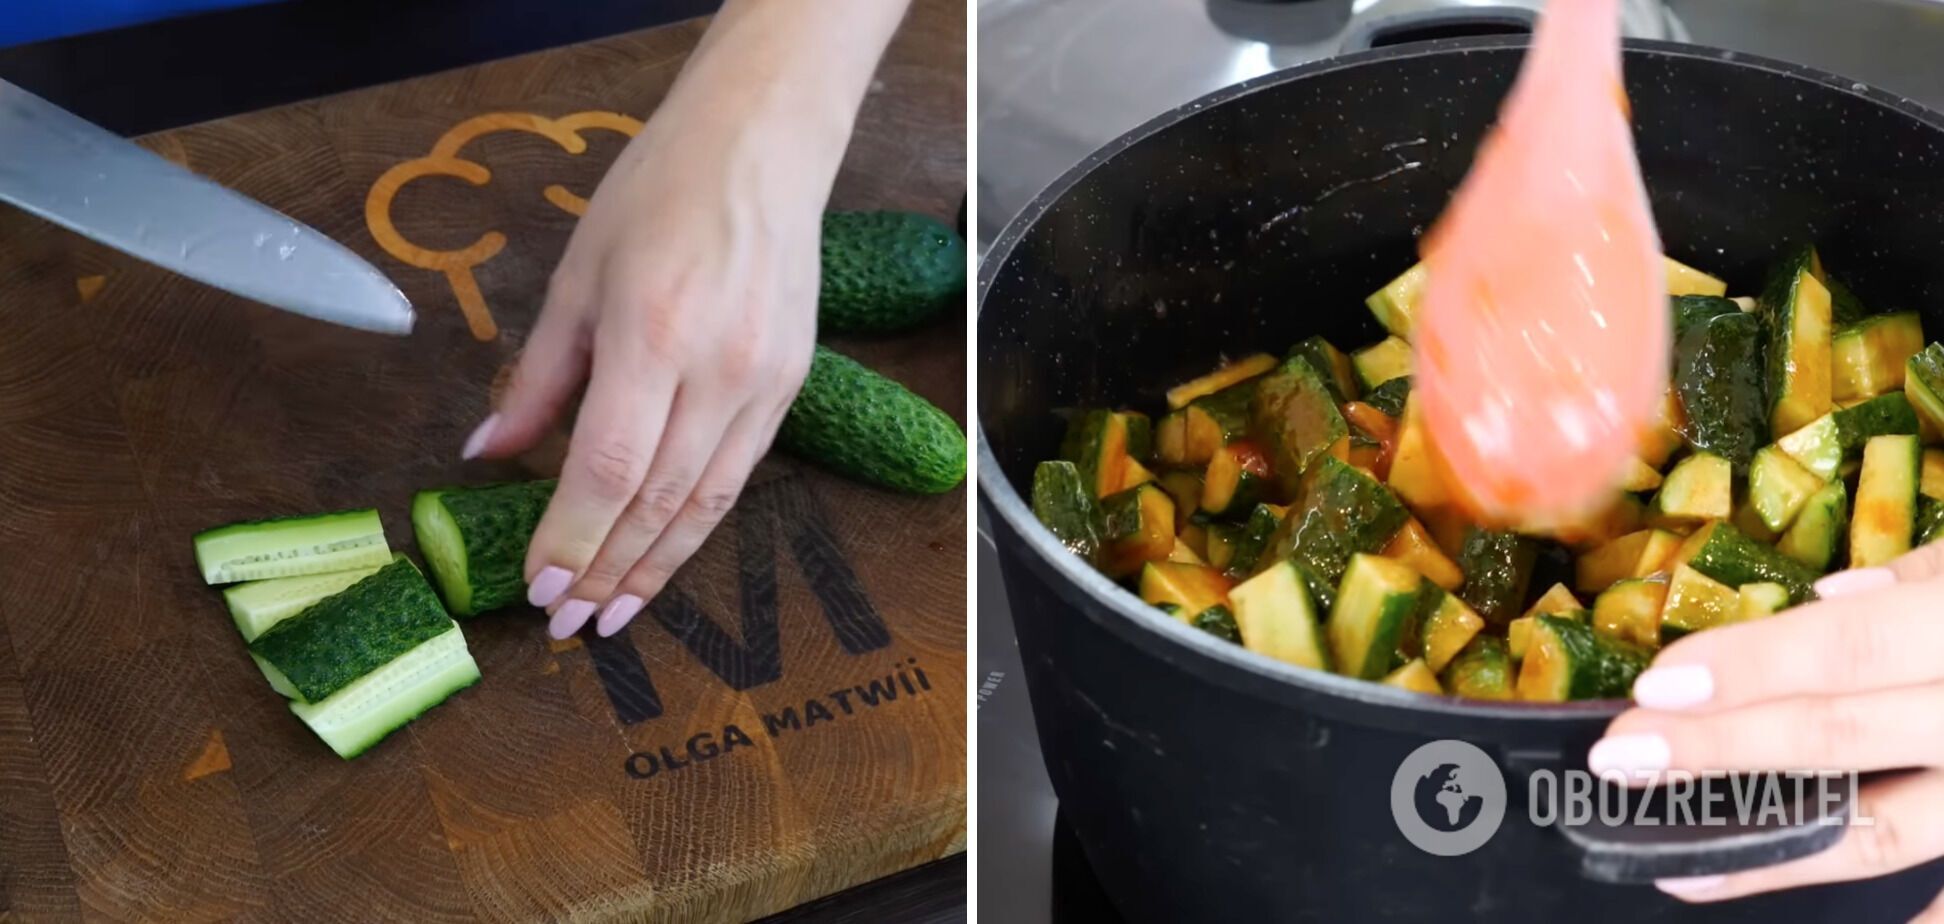 How long to cook the cucumbers in the marinade